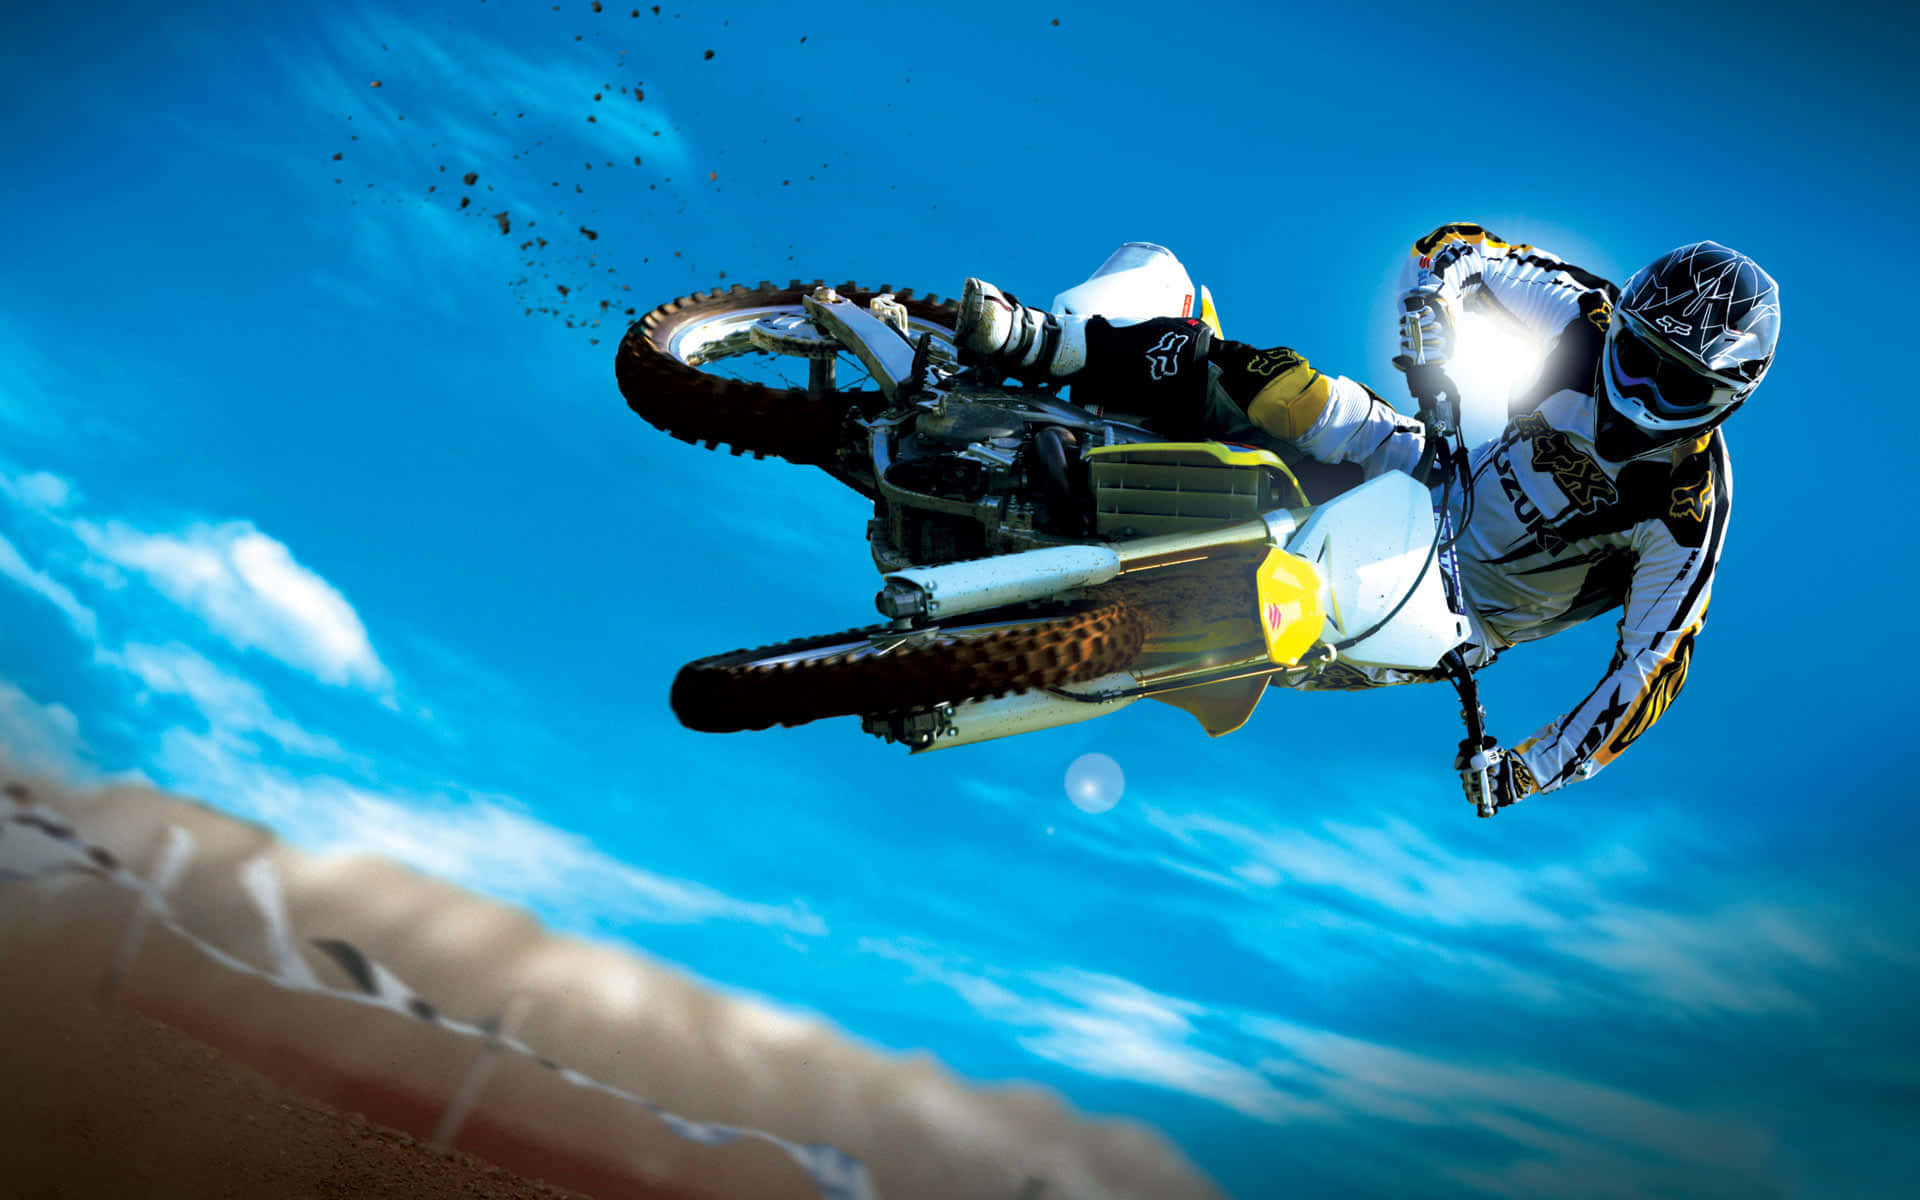 A fearless motocross rider soaring high mid-air in a thrilling jump